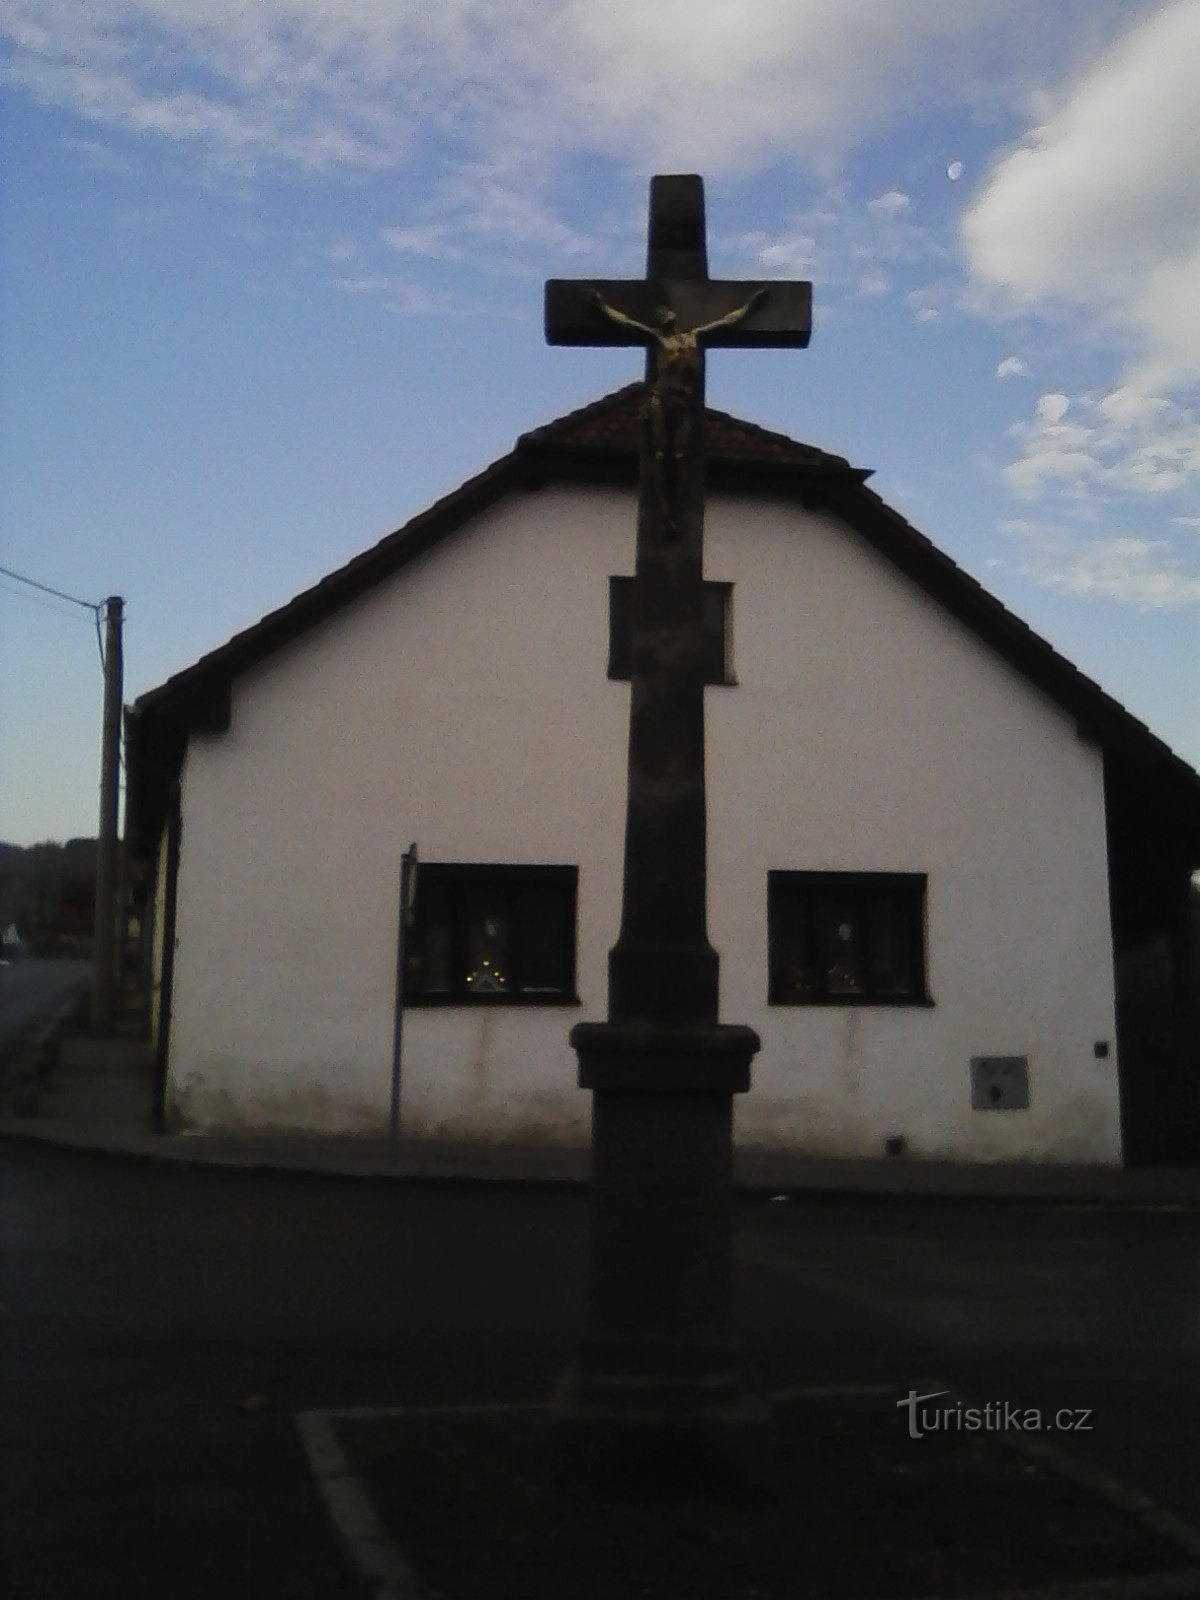 1. Cross at the end of the saddle.